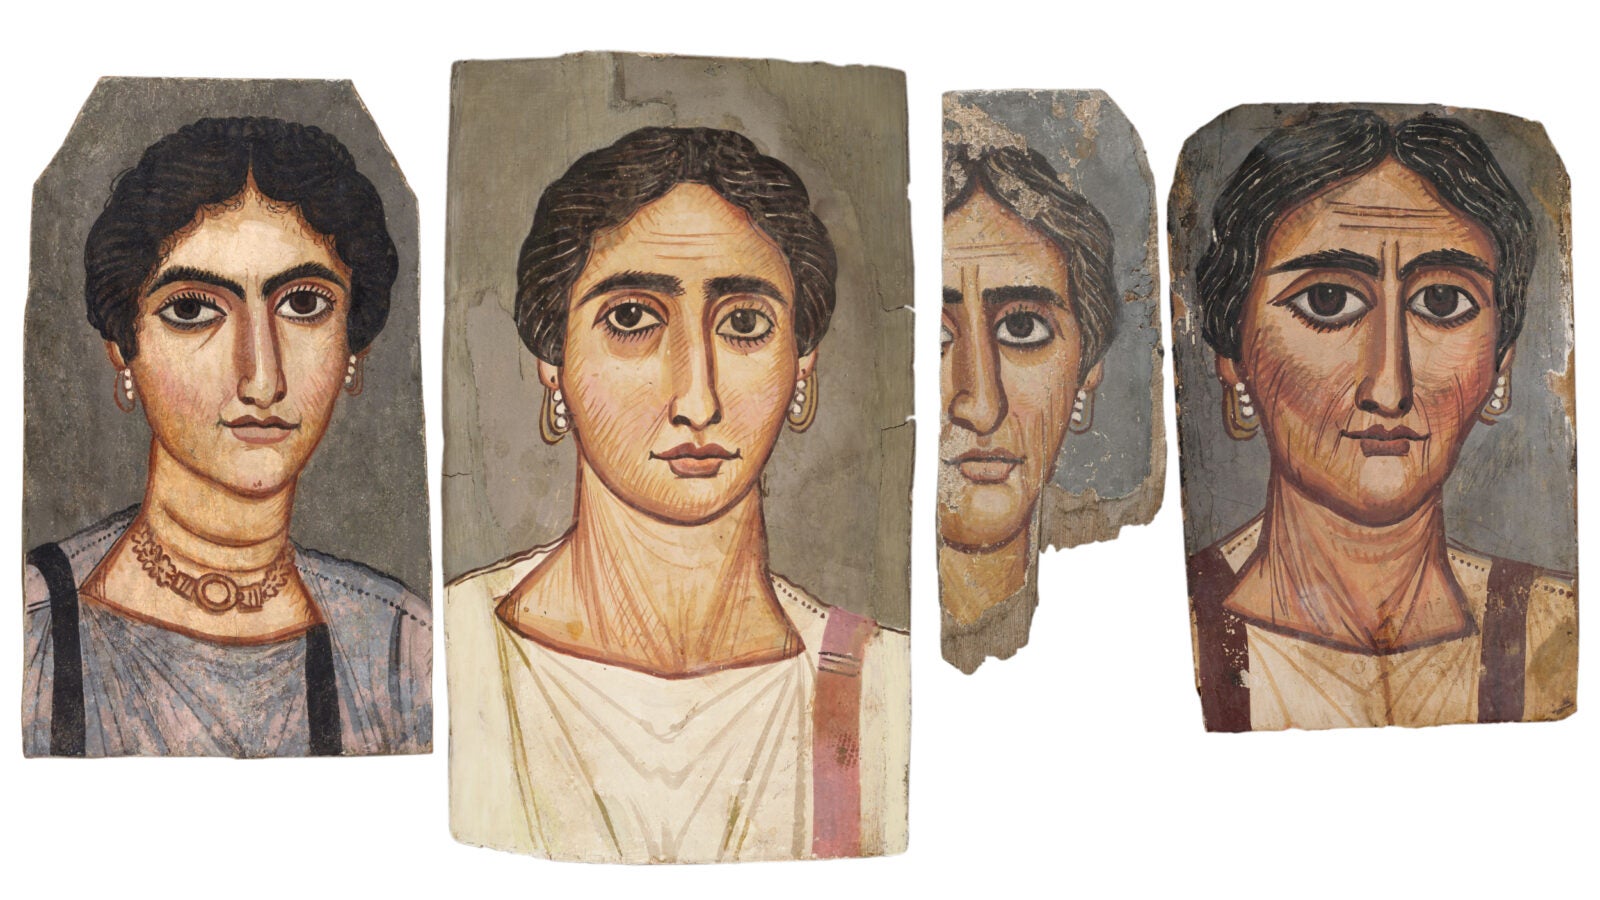 Four mummy portraits of women that art historians think may have been created by same artist or workshop due to similar outlines, wide expressive eyes, long nose, and pearl loop earrings.